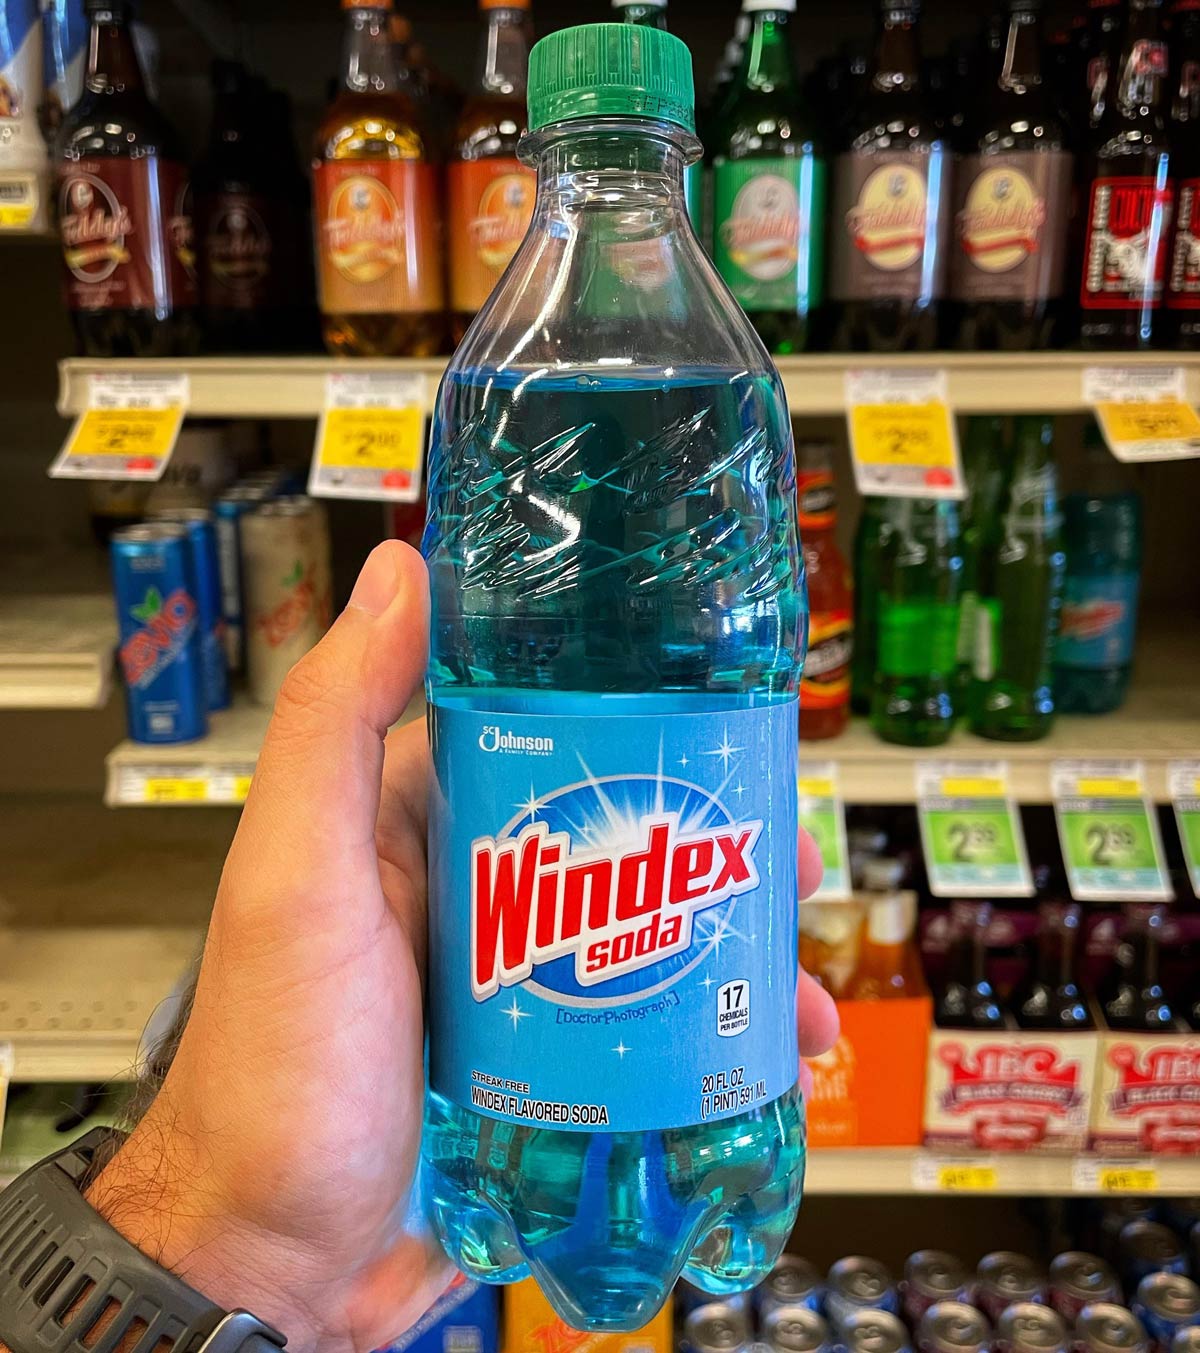 Starting my 7-Day Windex Soda cleanse today. Wish me luck!